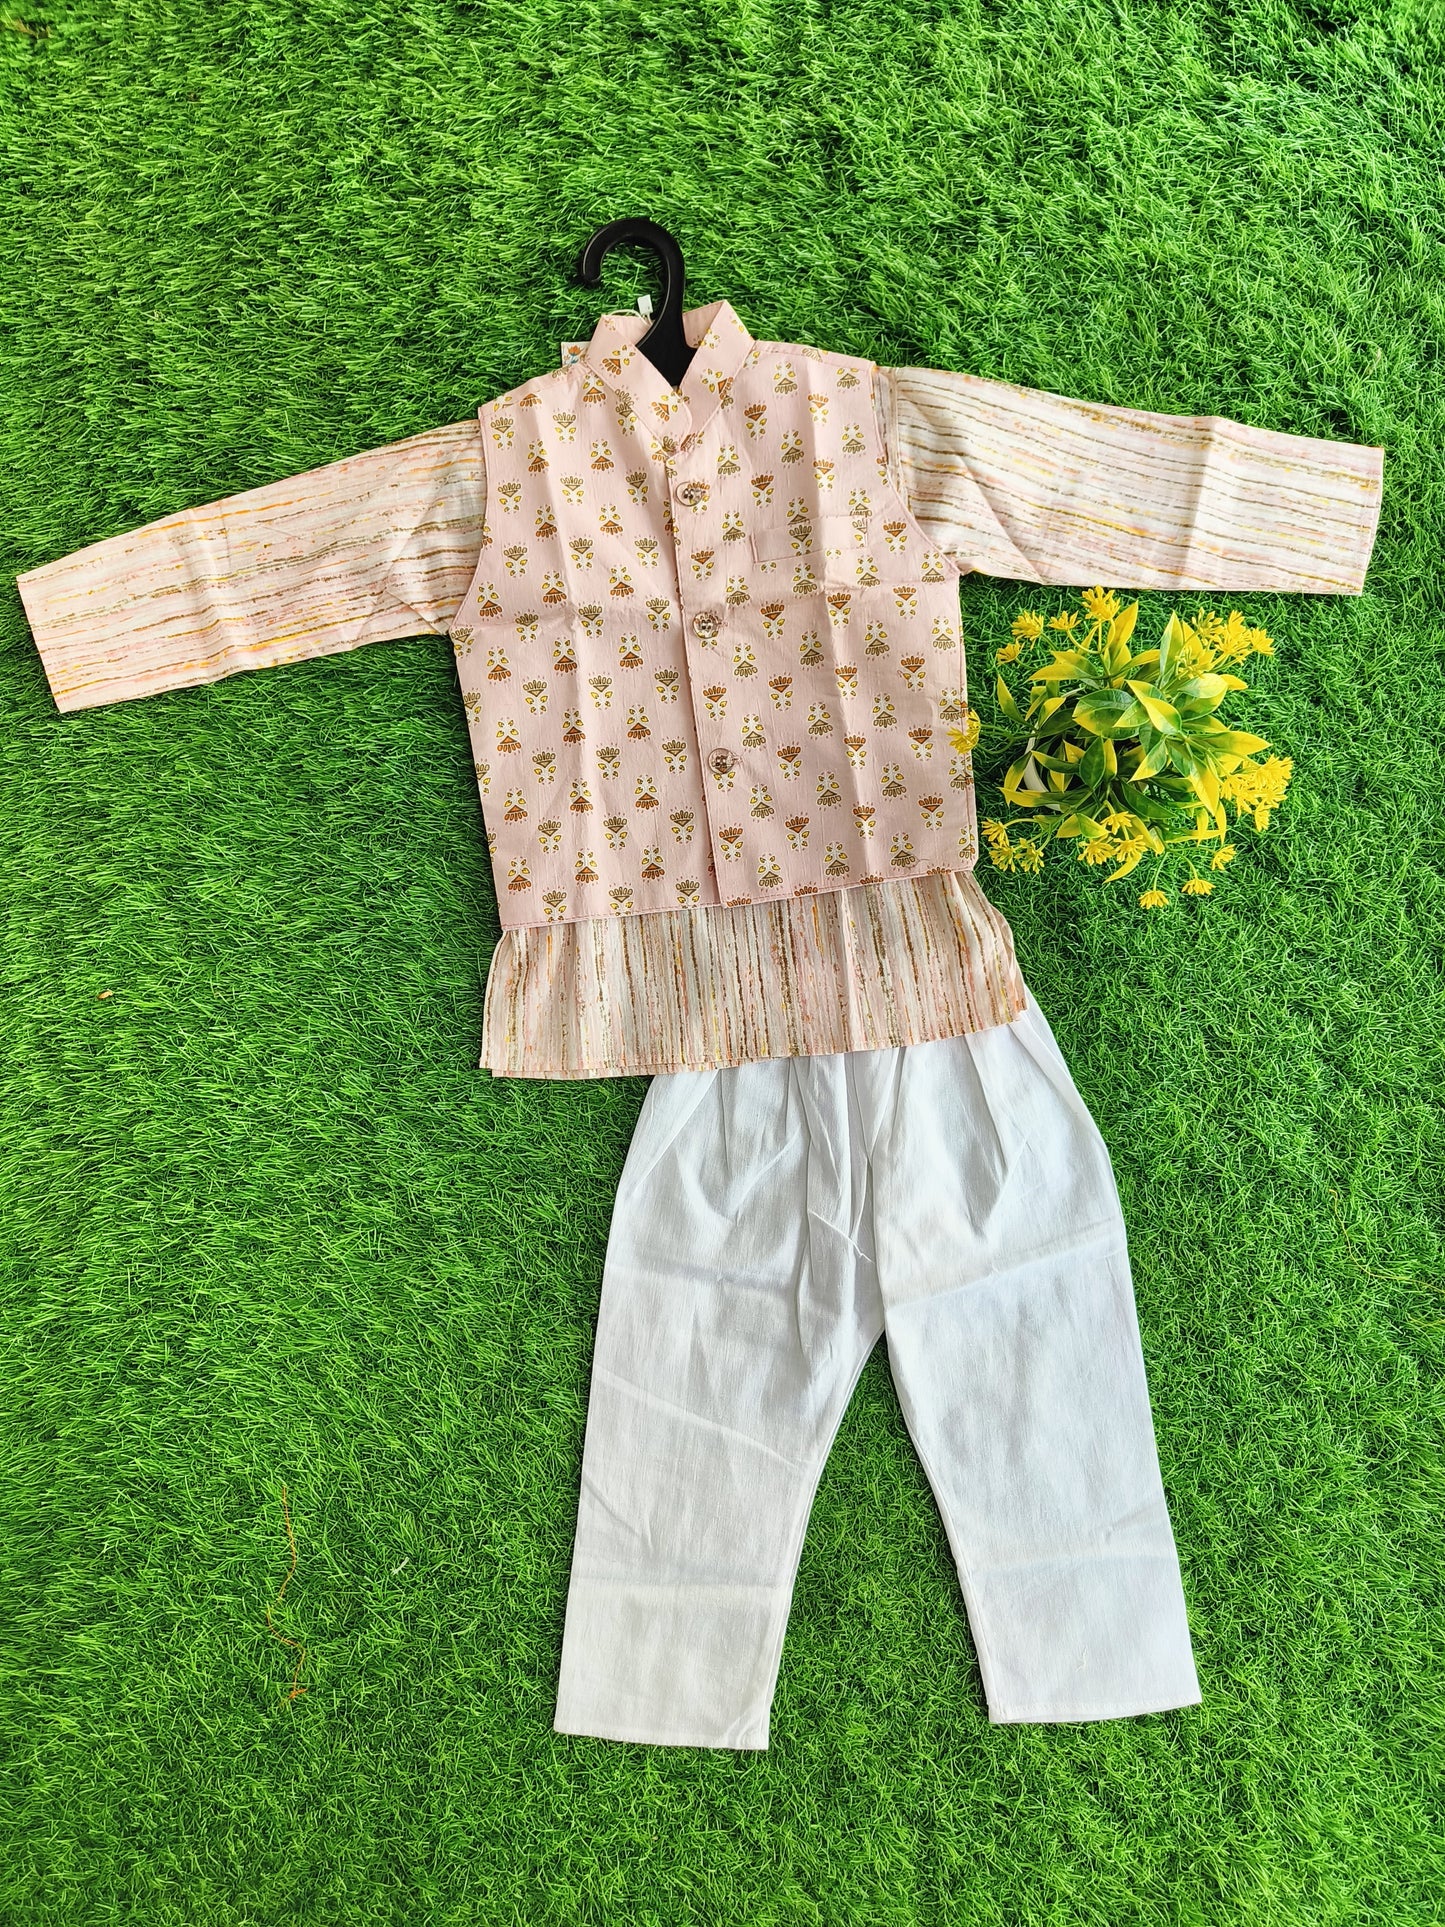 Classic Cream Flower Printed Nehru Jacket with Linen Kurta Pant Outfit Set for Boy